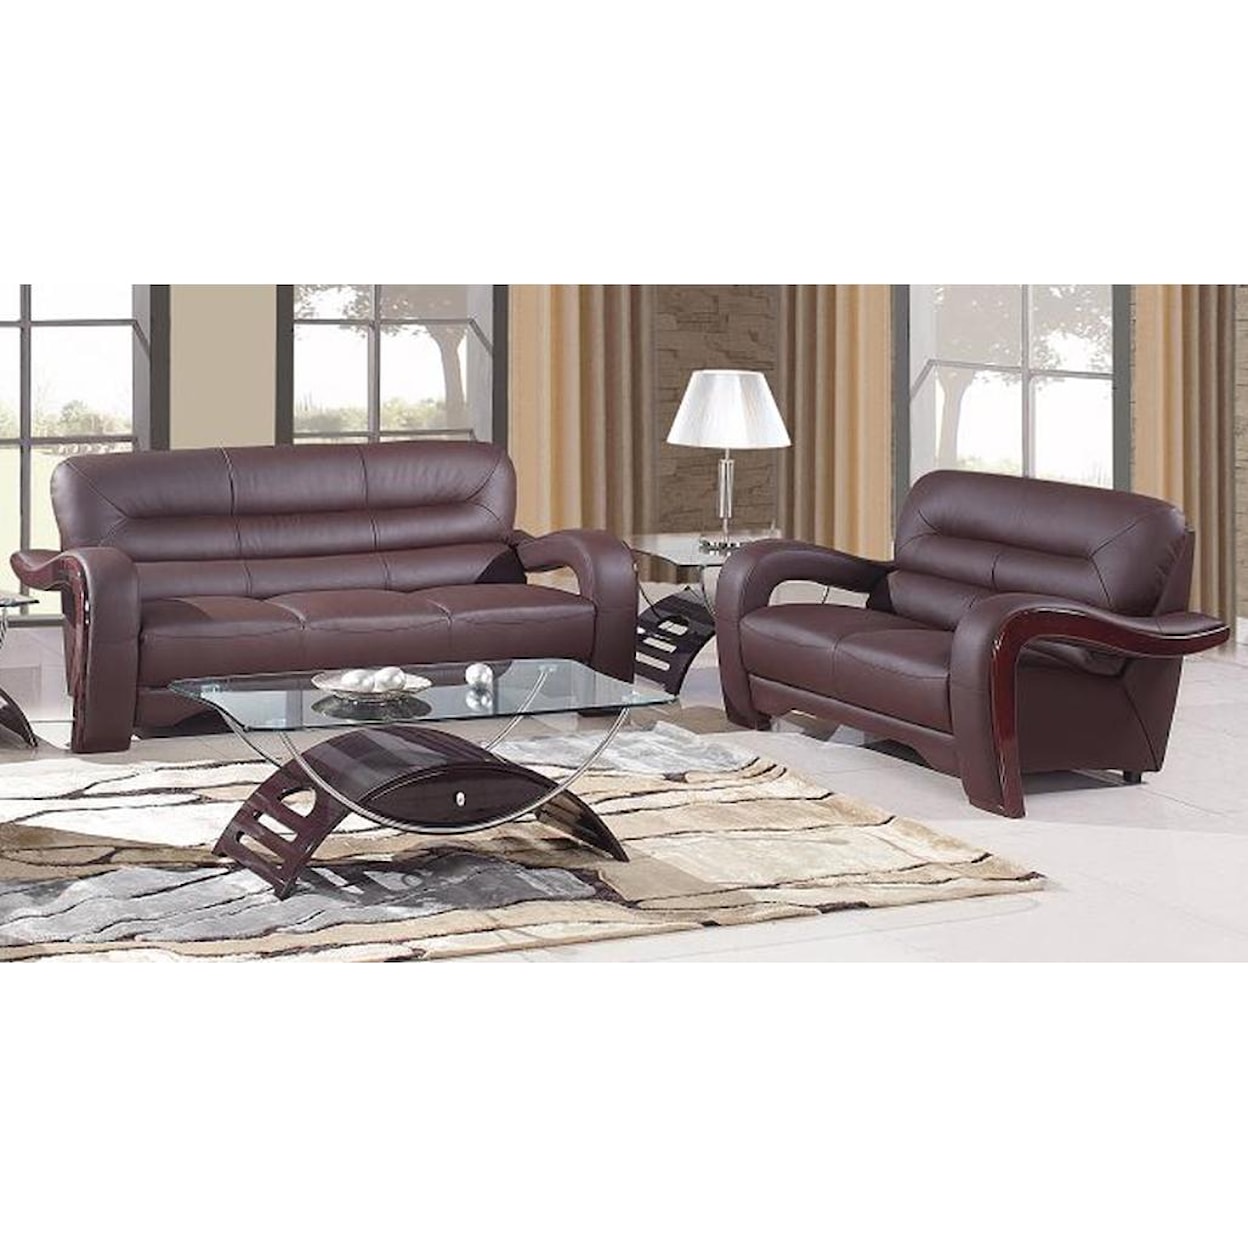 Global Furniture 992 2 Piece Living Room Group